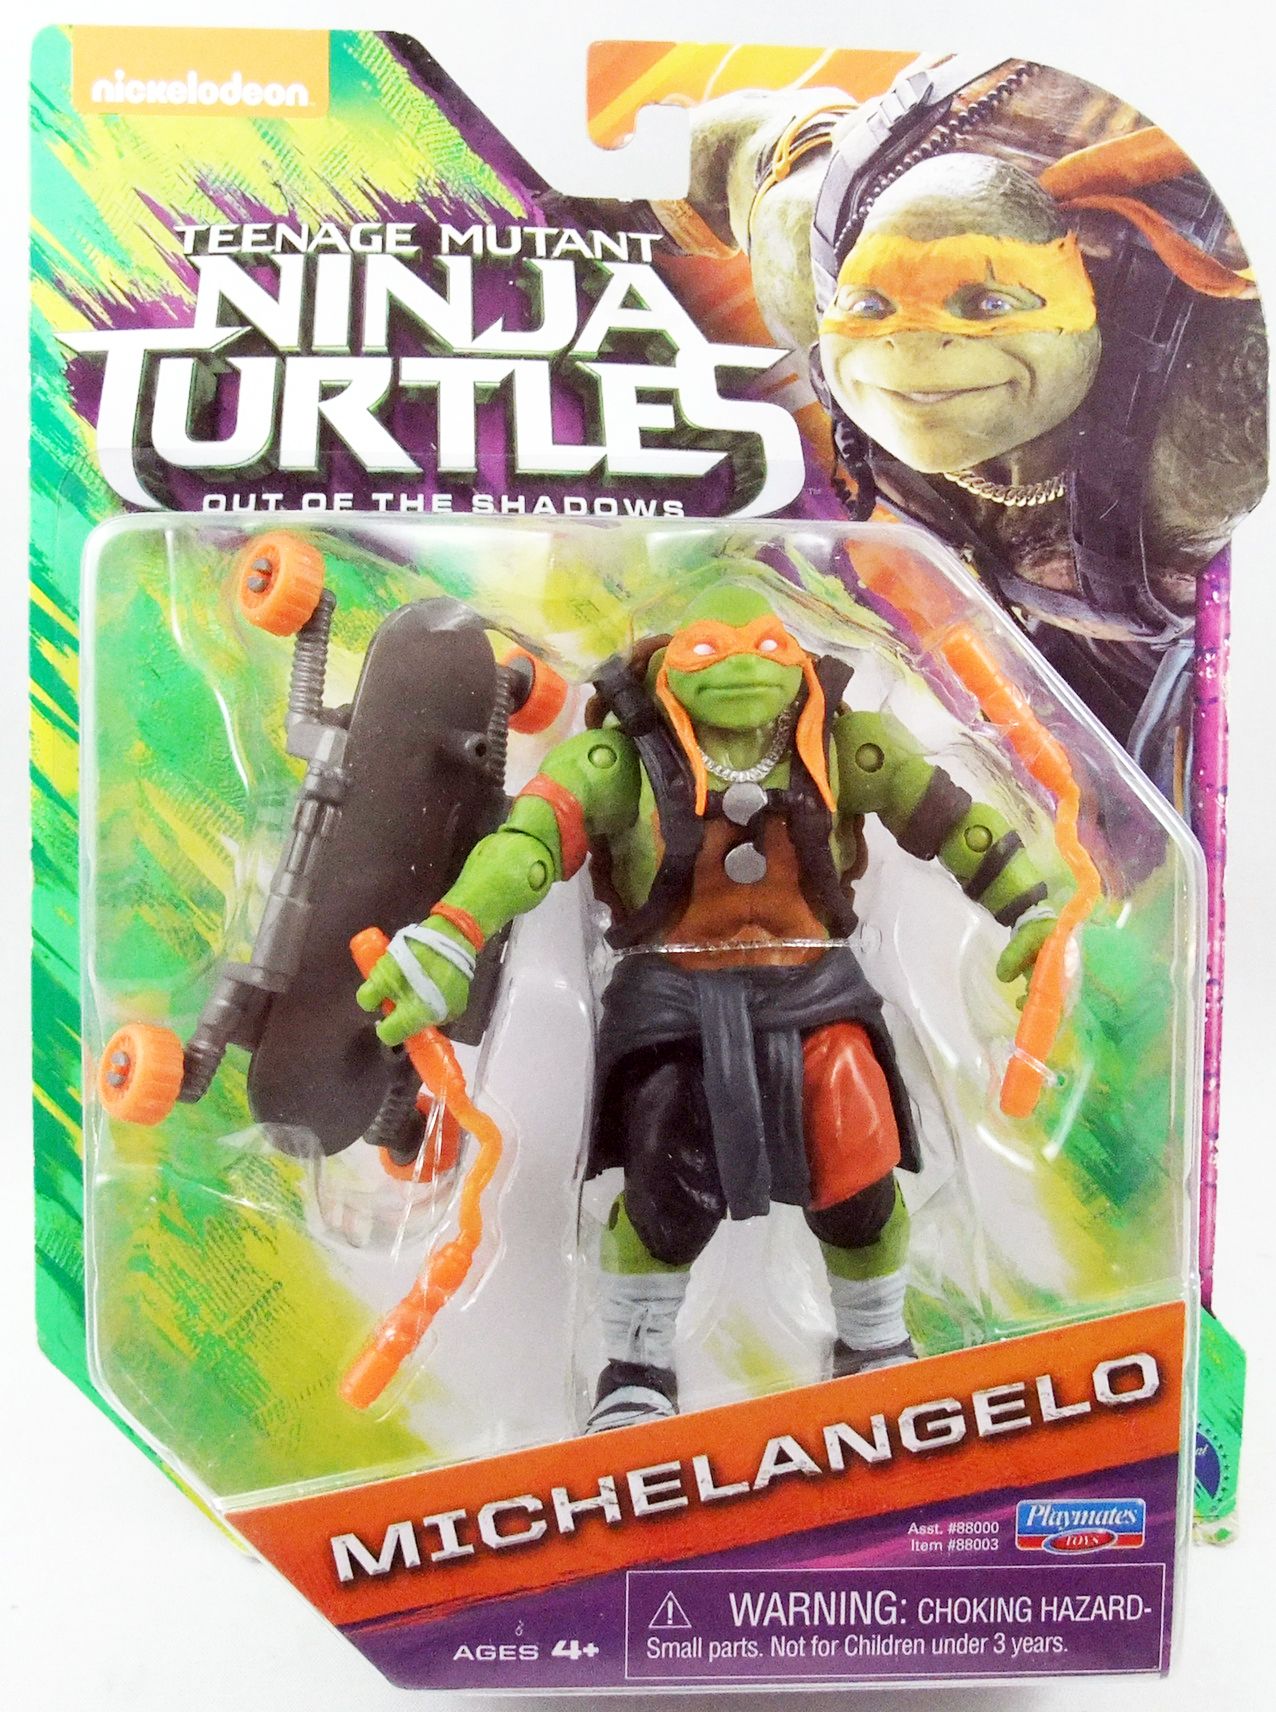 Perfect Edelsteen Magazijn Ninja Turtles 2 : Out of the Shadows (2016 Movie) - Michelangelo